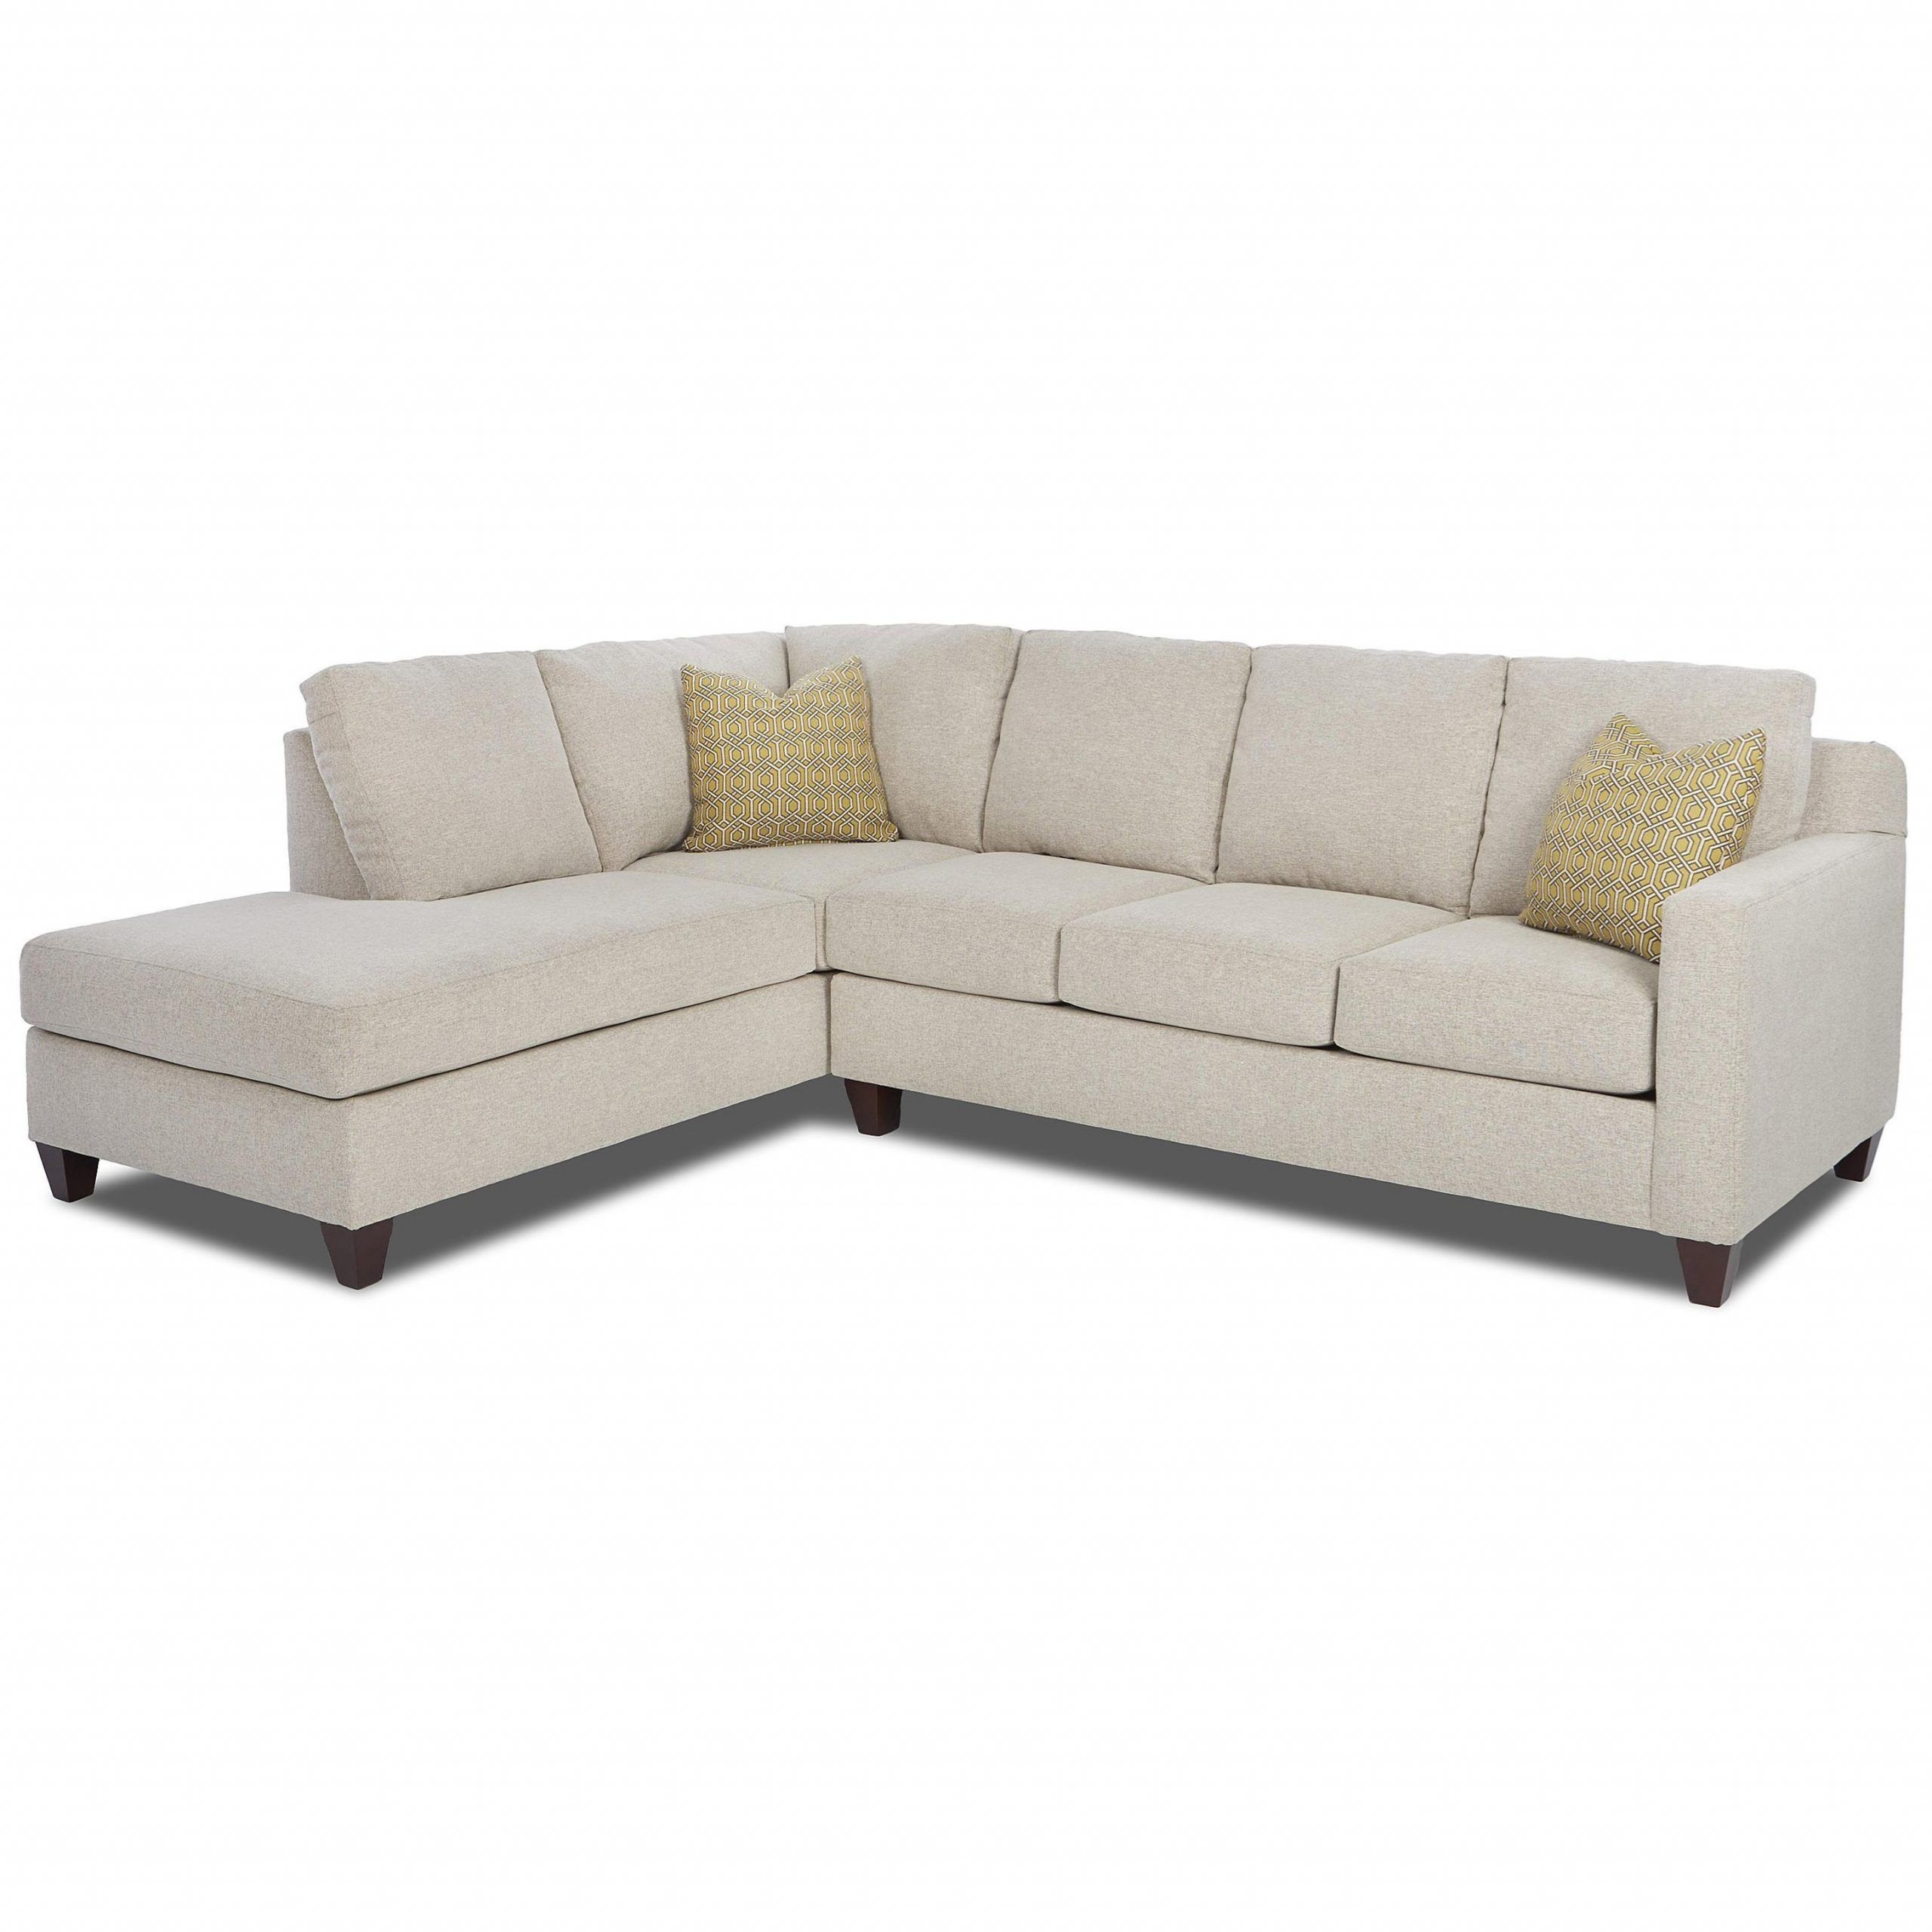 Klaussner Bosco Contemporary 2 Piece Sectional With Left With Regard To Hannah Left Sectional Sofas (View 7 of 15)